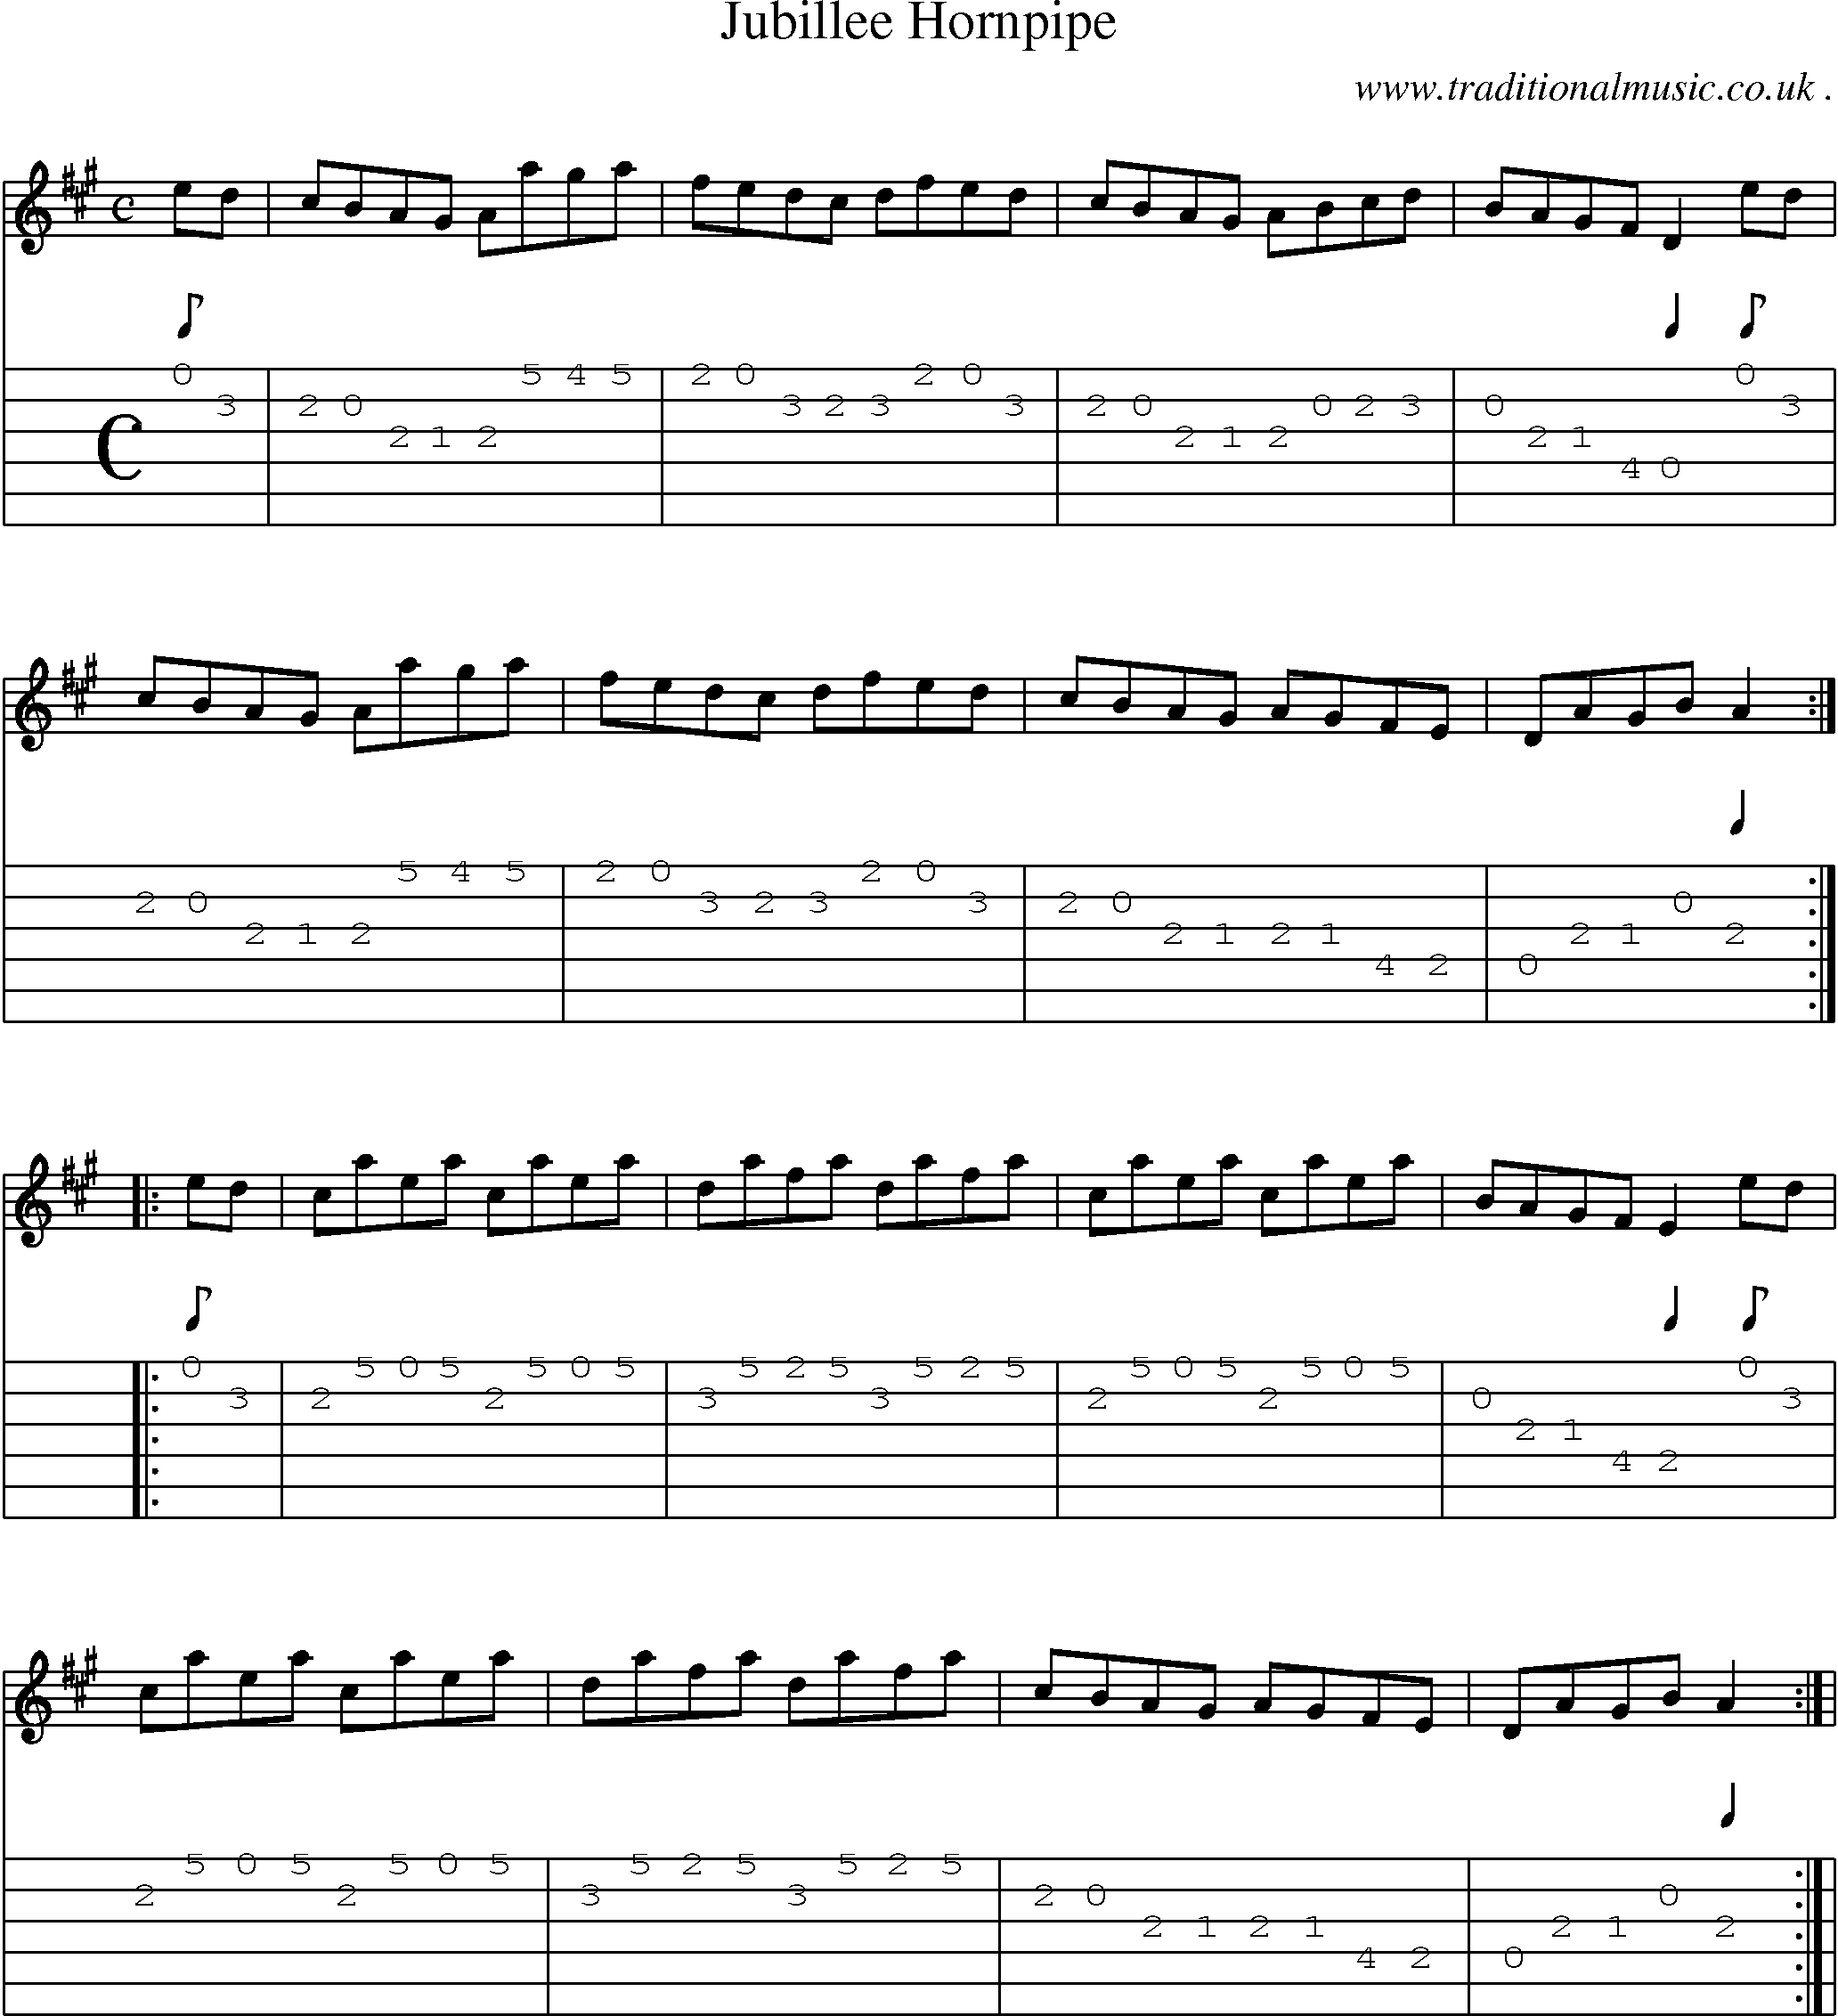 Sheet-Music and Guitar Tabs for Jubillee Hornpipe